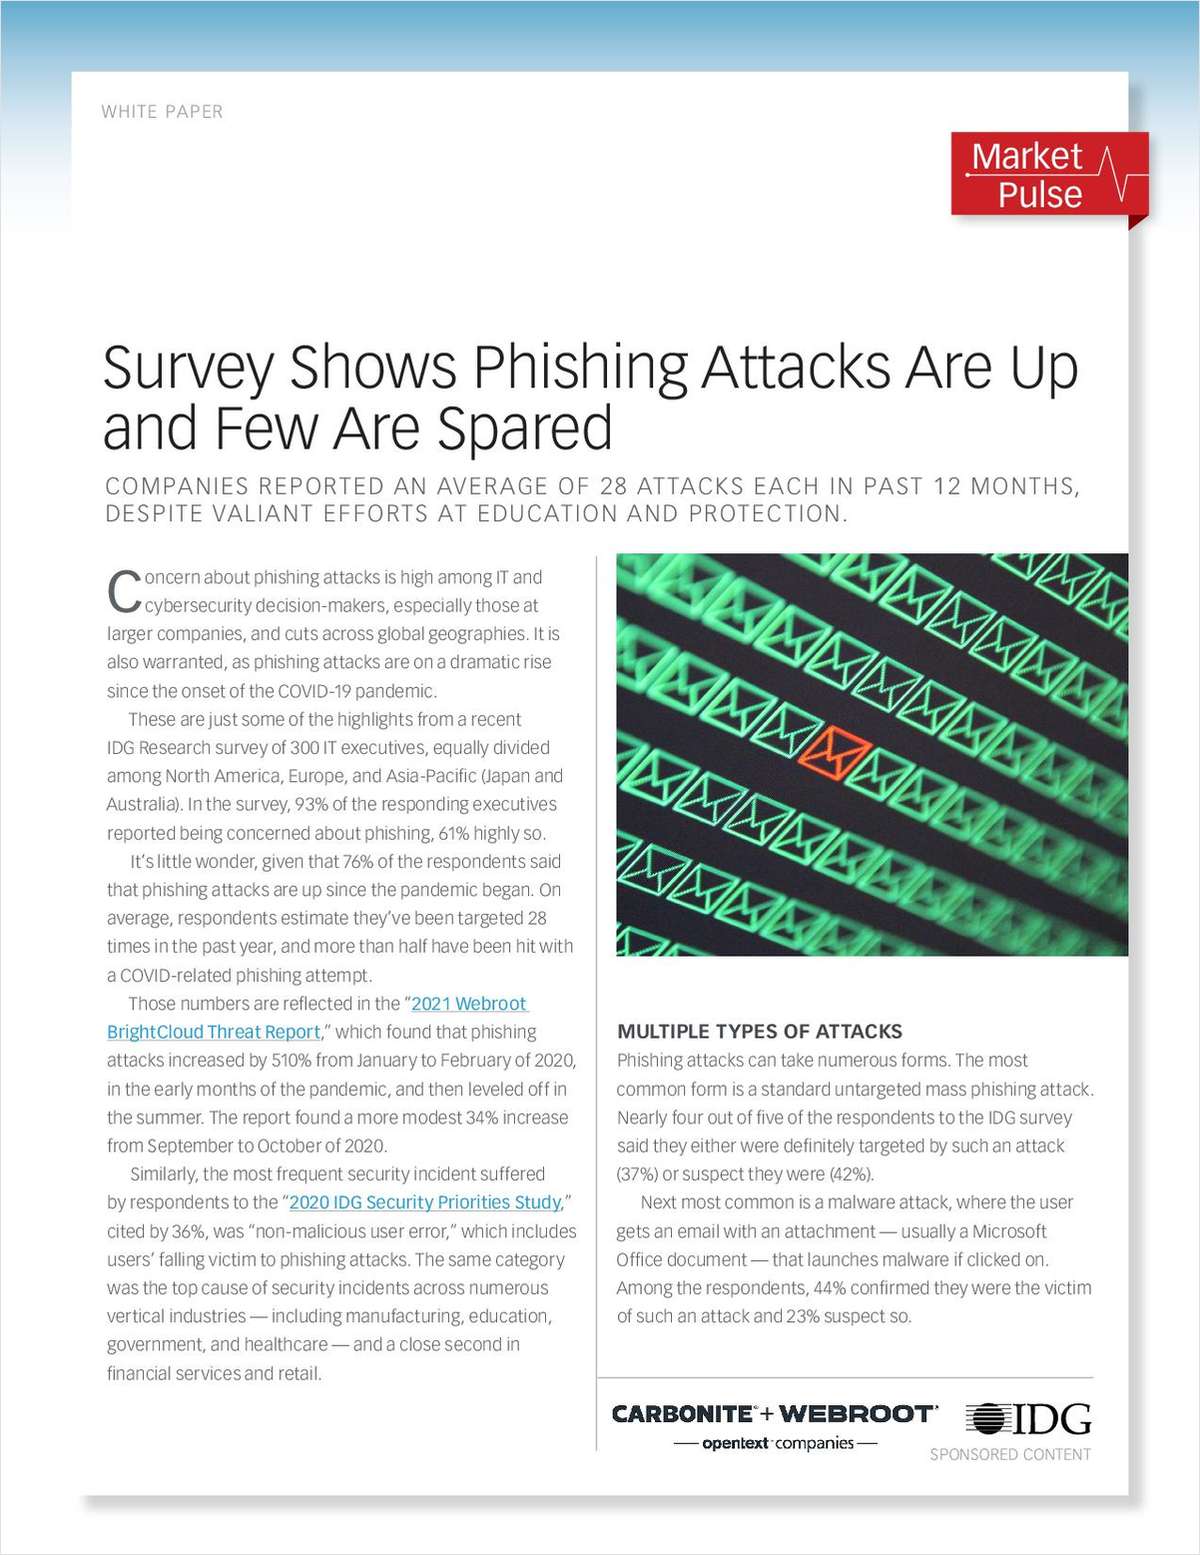 Survey Shows Phishing Attacks Are Up and Few Are Spared